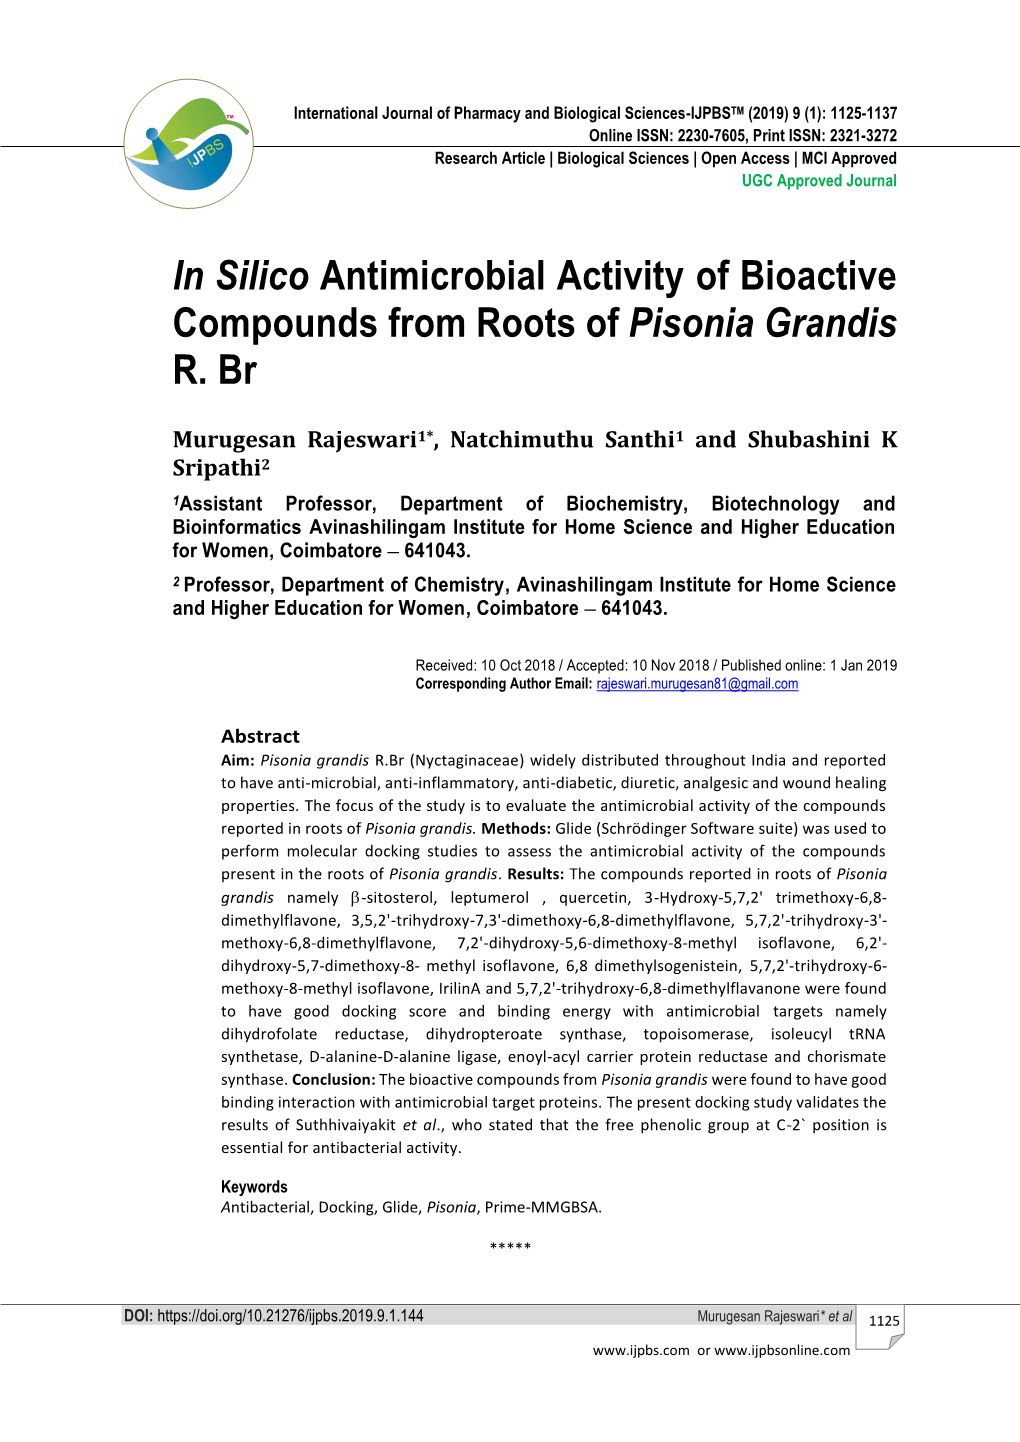 In Silico Antimicrobial Activity of Bioactive Compounds from Roots of Pisonia Grandis R